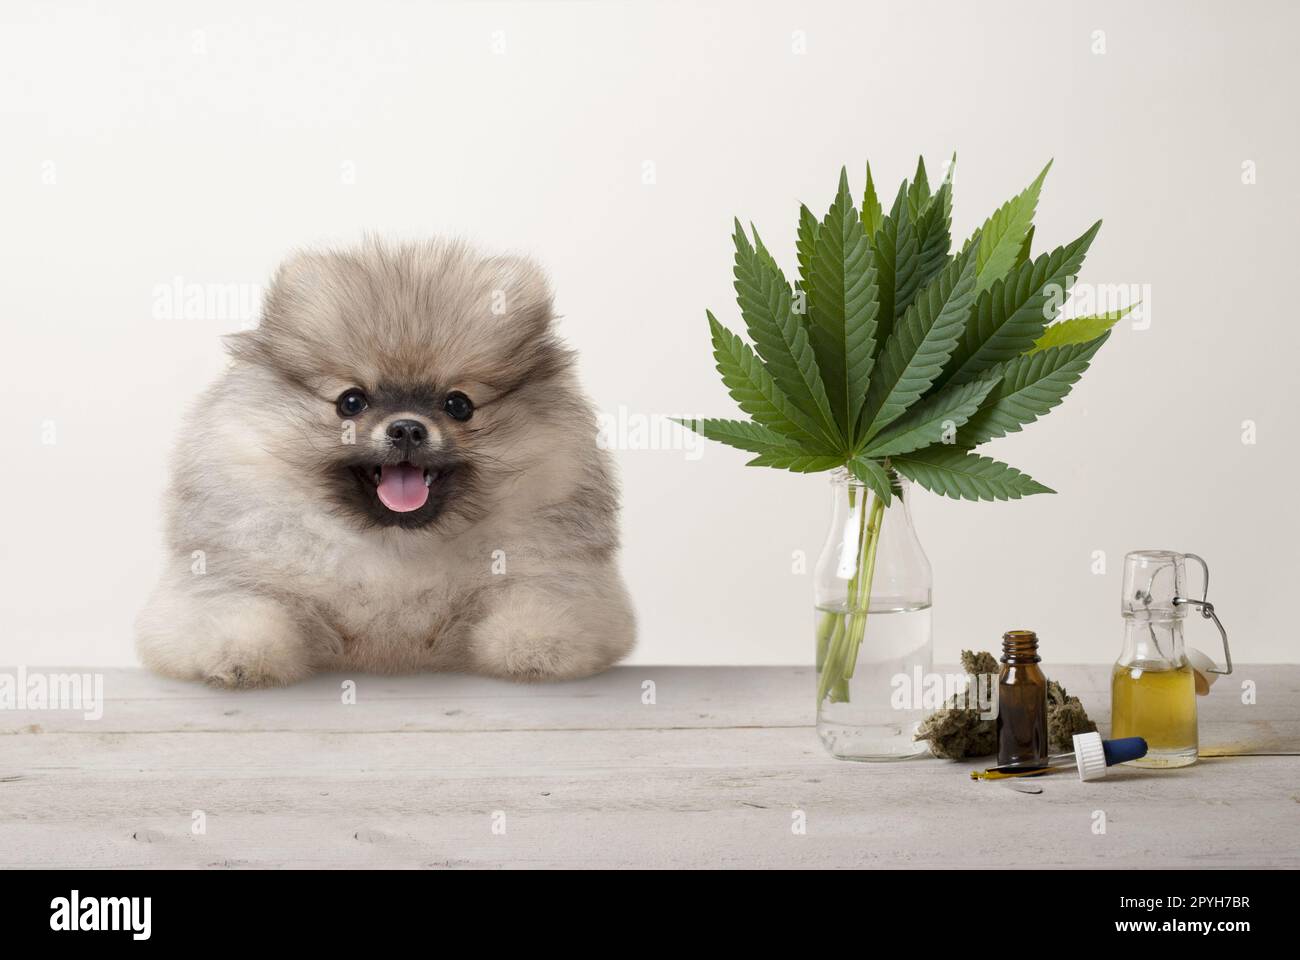 smiling pomeranian puppy dog and marujuana cannabis sativa weed leaves, flower bud and CBD oil in glass dropper bottle, on wooden table Stock Photo